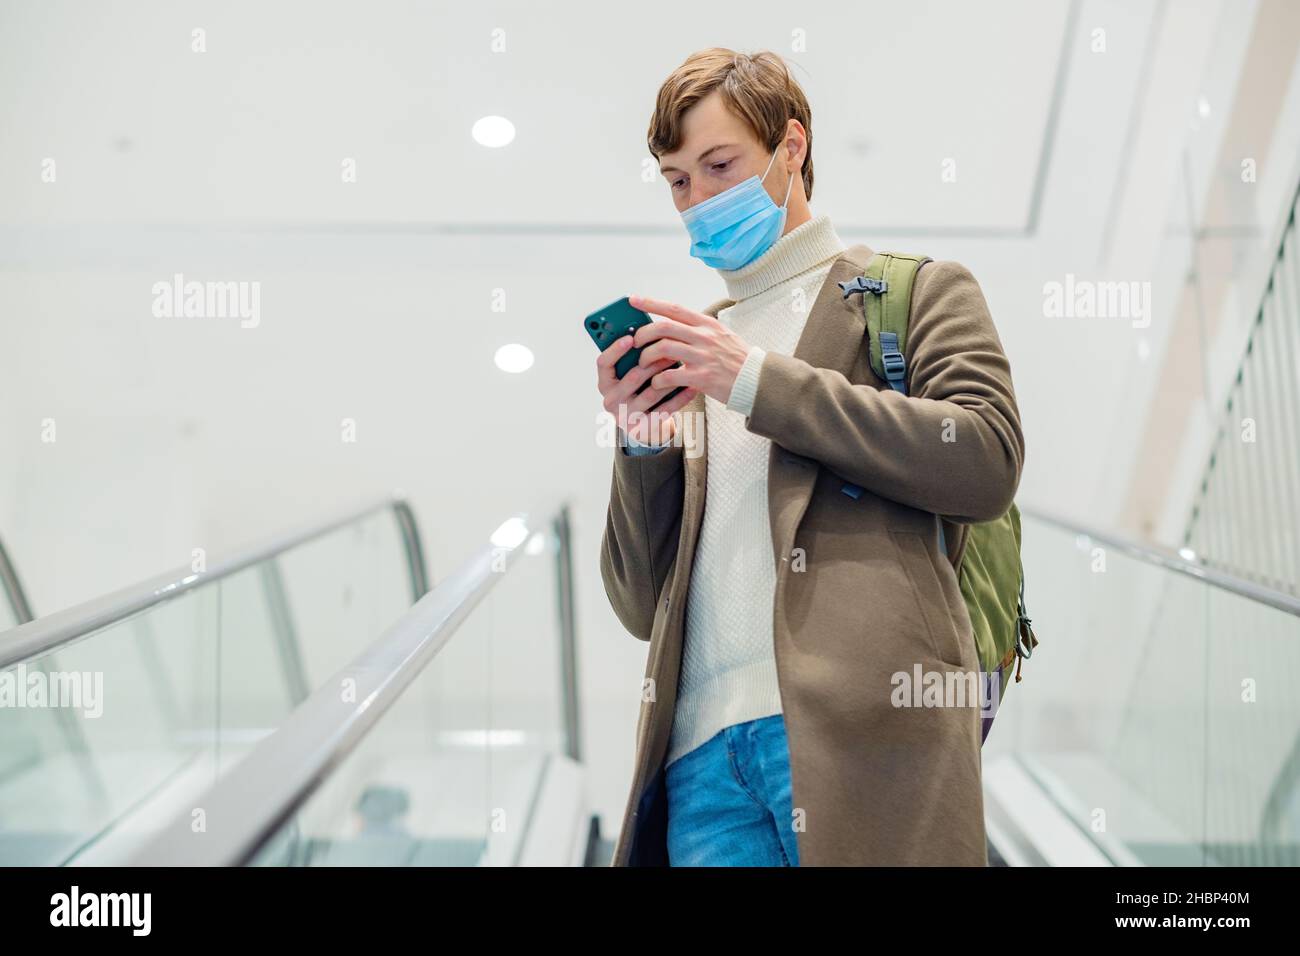 modern man in a brown coat with a backpack and a mask rides an escalator in a shopping business center and looks at the phone in his hands Stock Photo